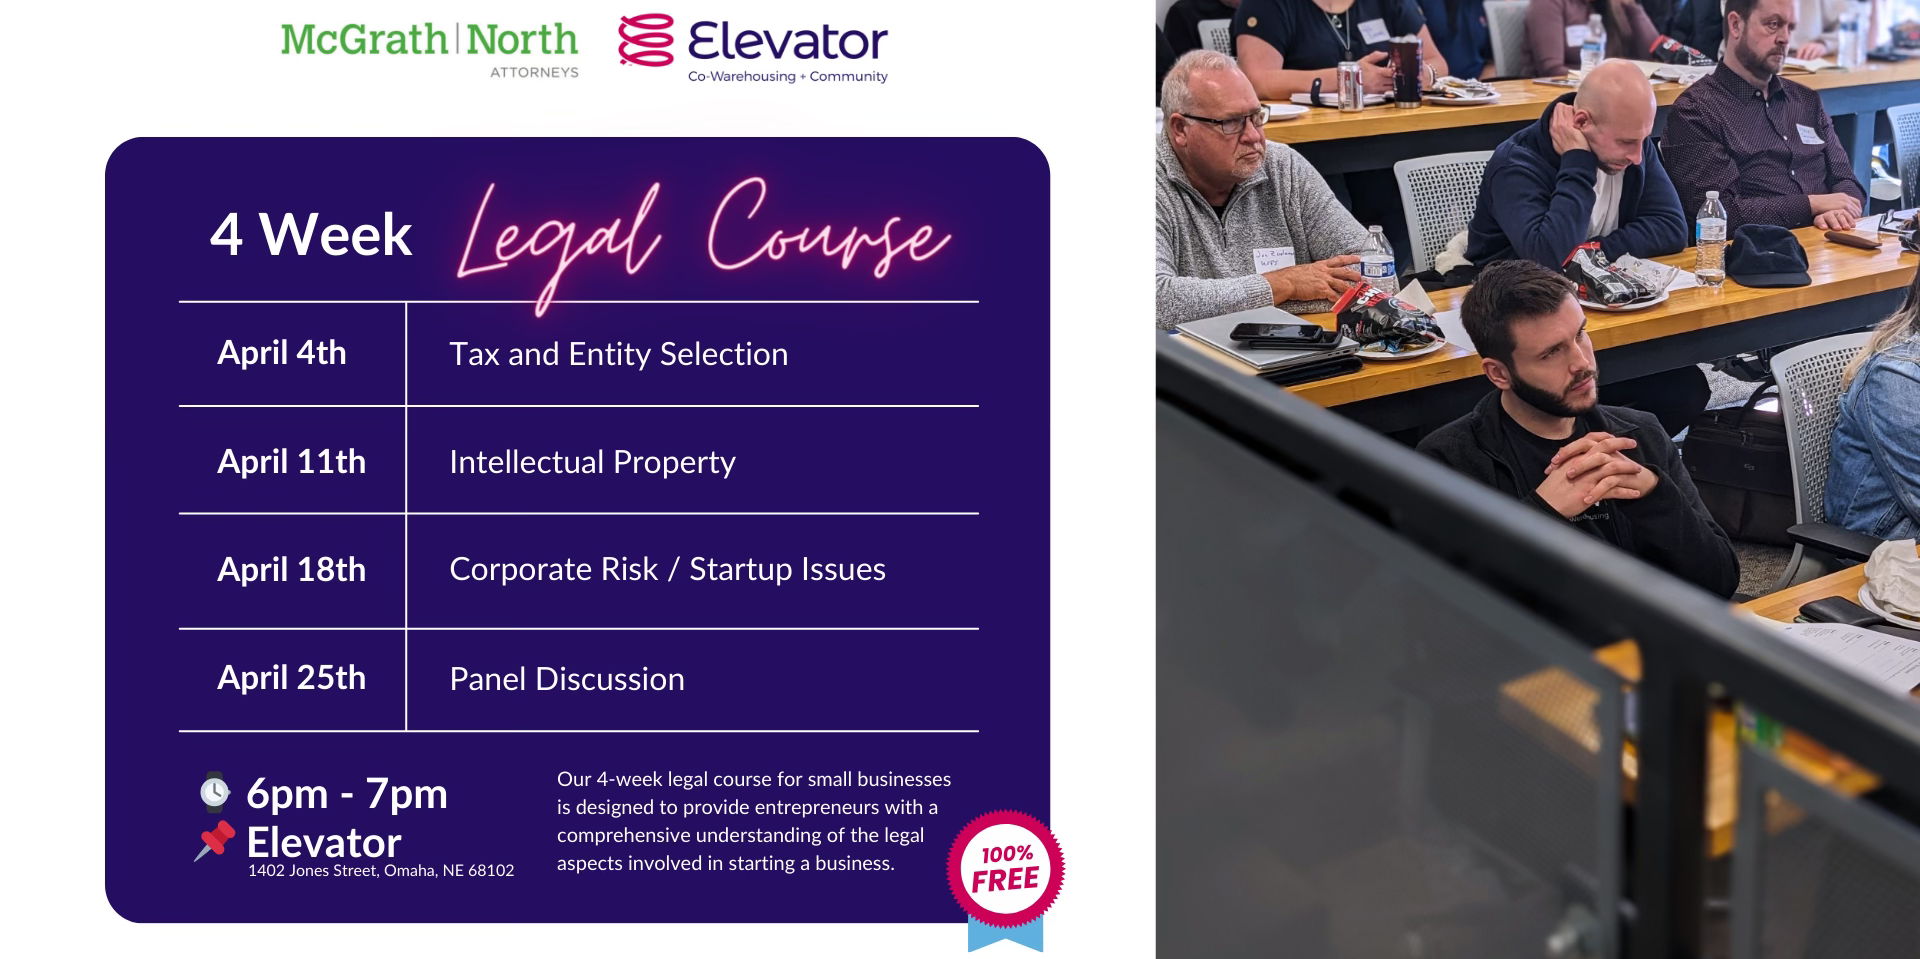 4-Week Legal Course: Powered by McGrath North & Elevator Co-Warehousing  promotional image